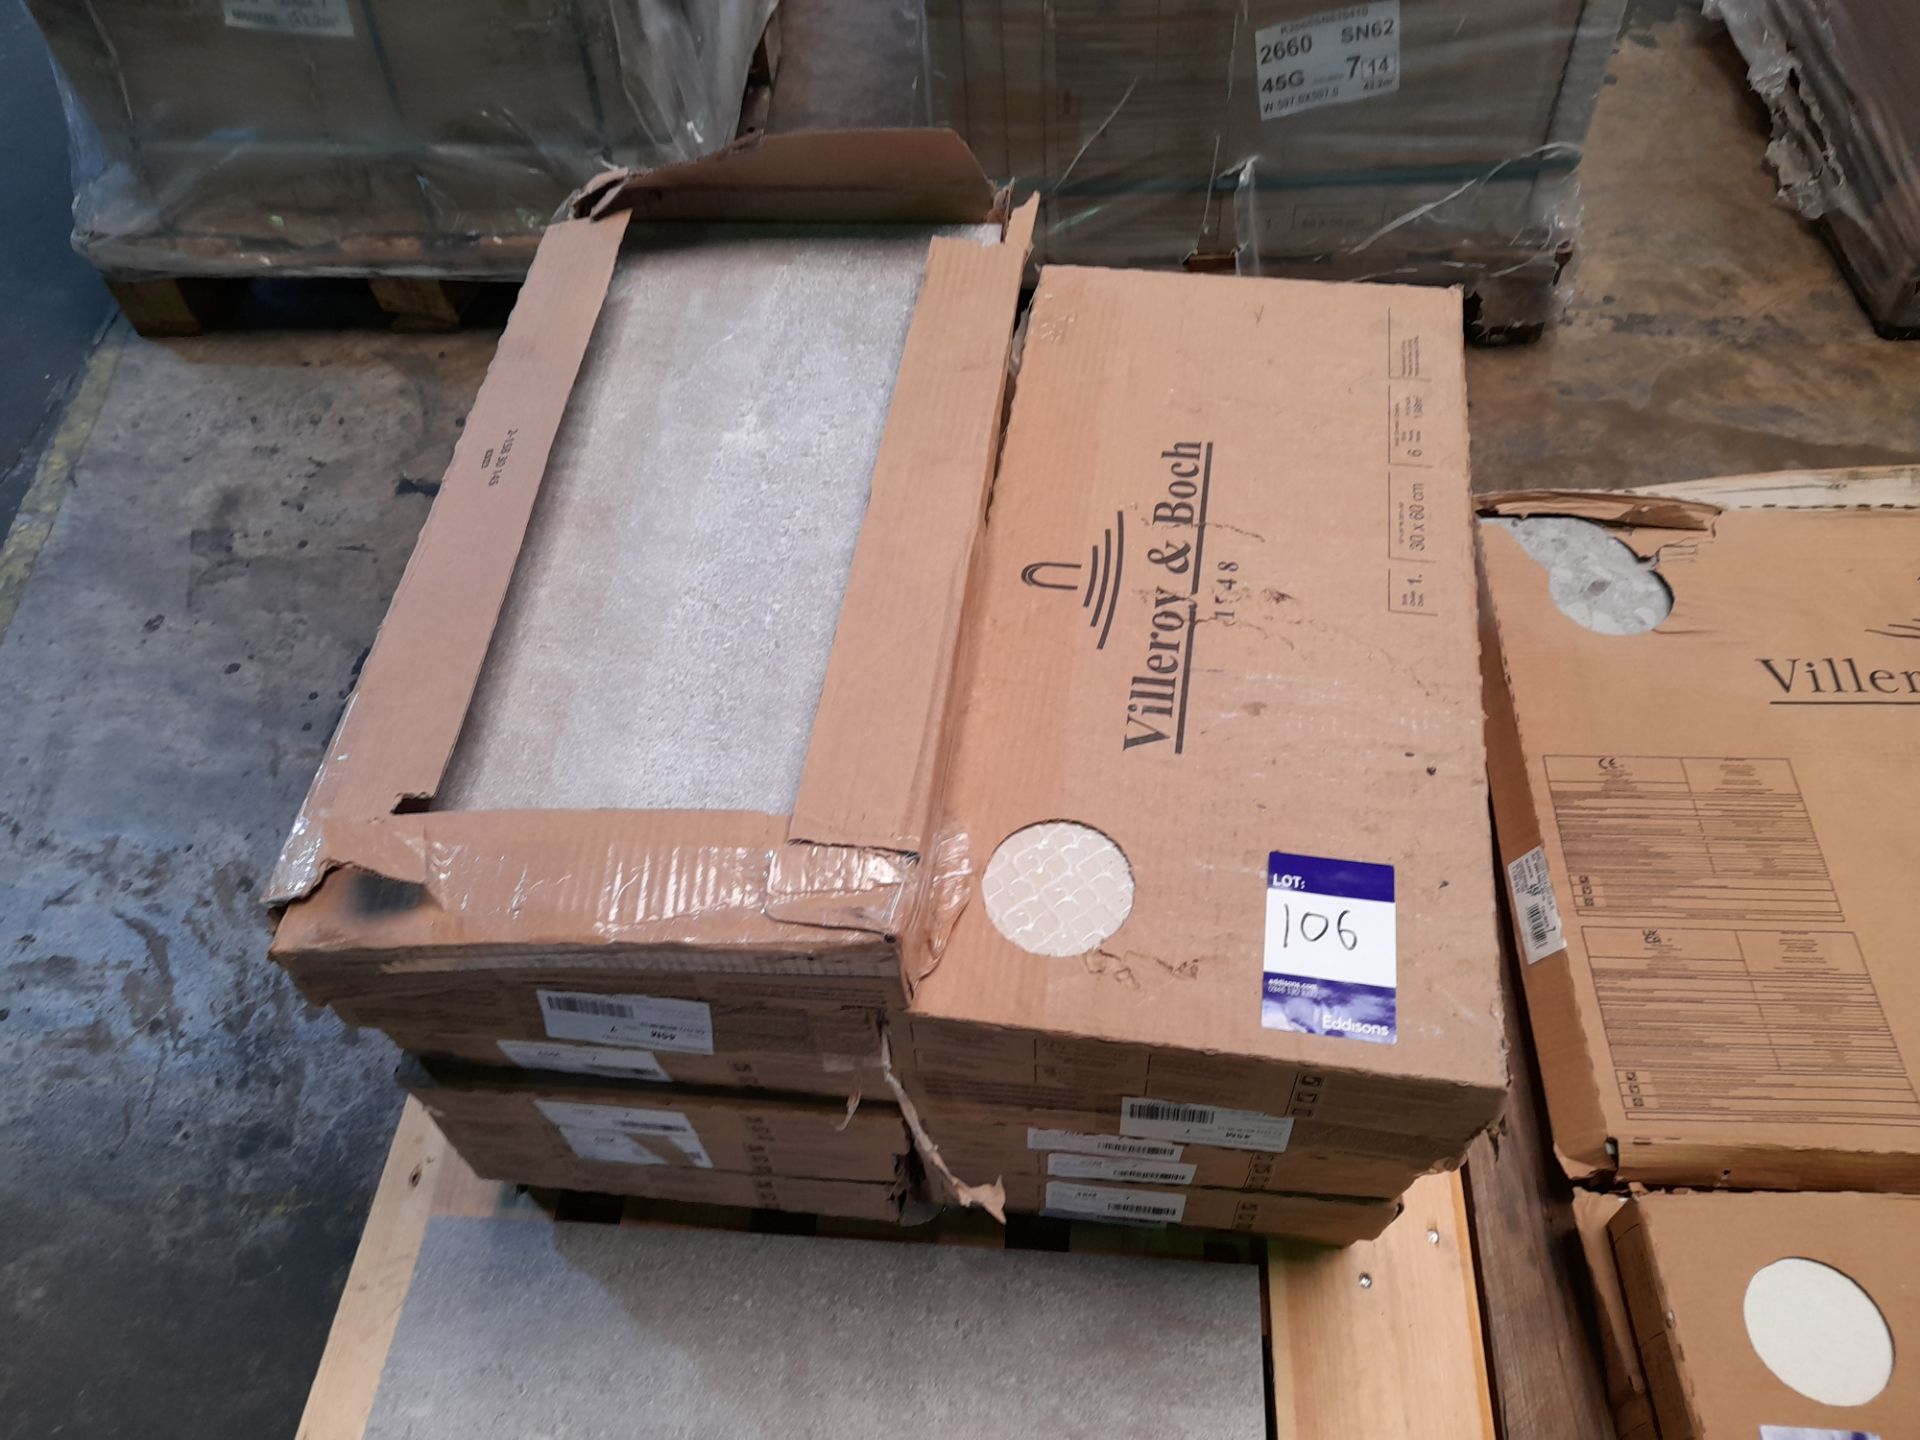 Villeroy & Boch various tiles to 3 pallets - Image 2 of 4